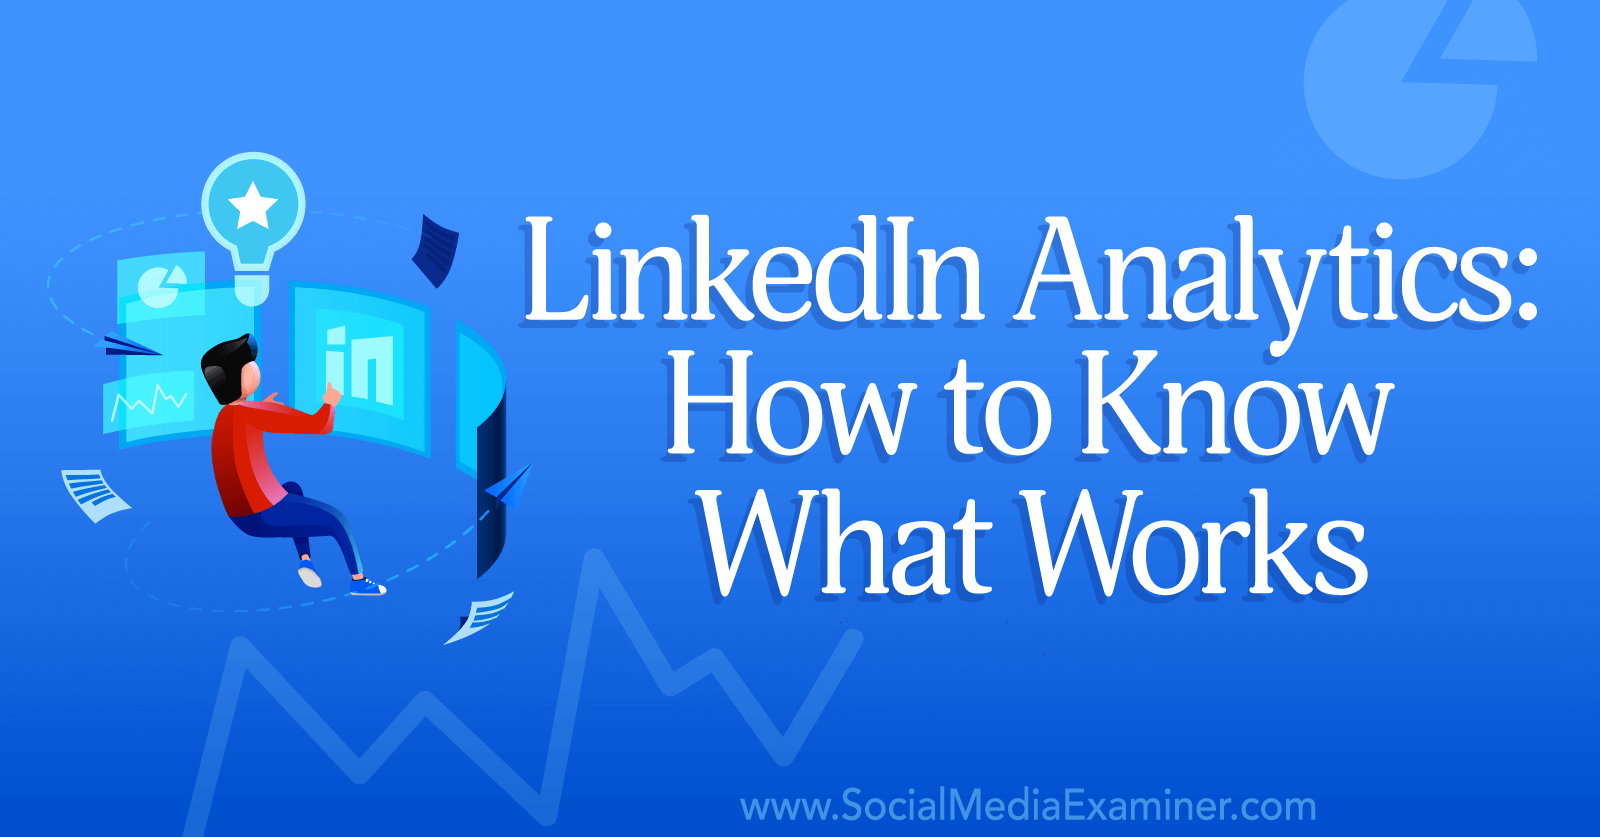 LinkedIn Analytics: How to Know What Works by Social Media Examiner